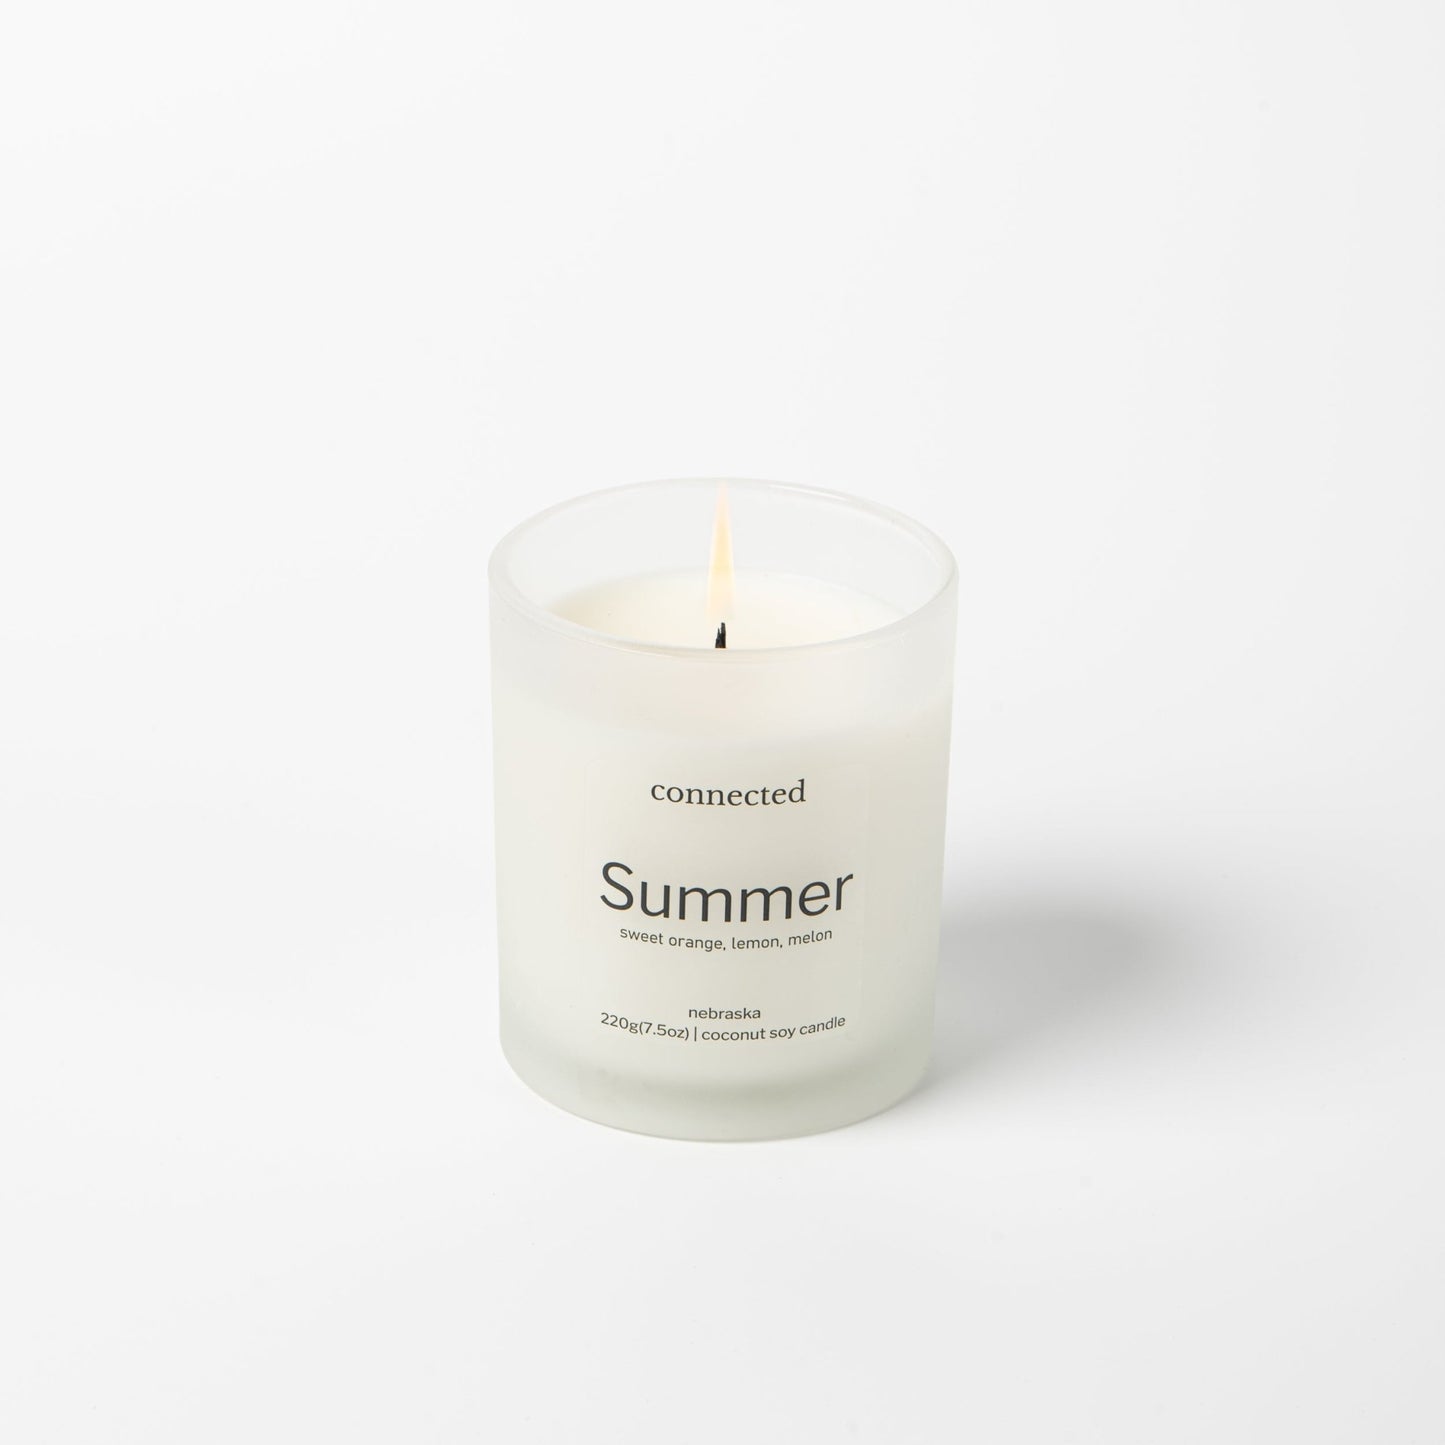 Summer -Coconut soy candle - Connected Fragrance Company - Connected Fragrance Company